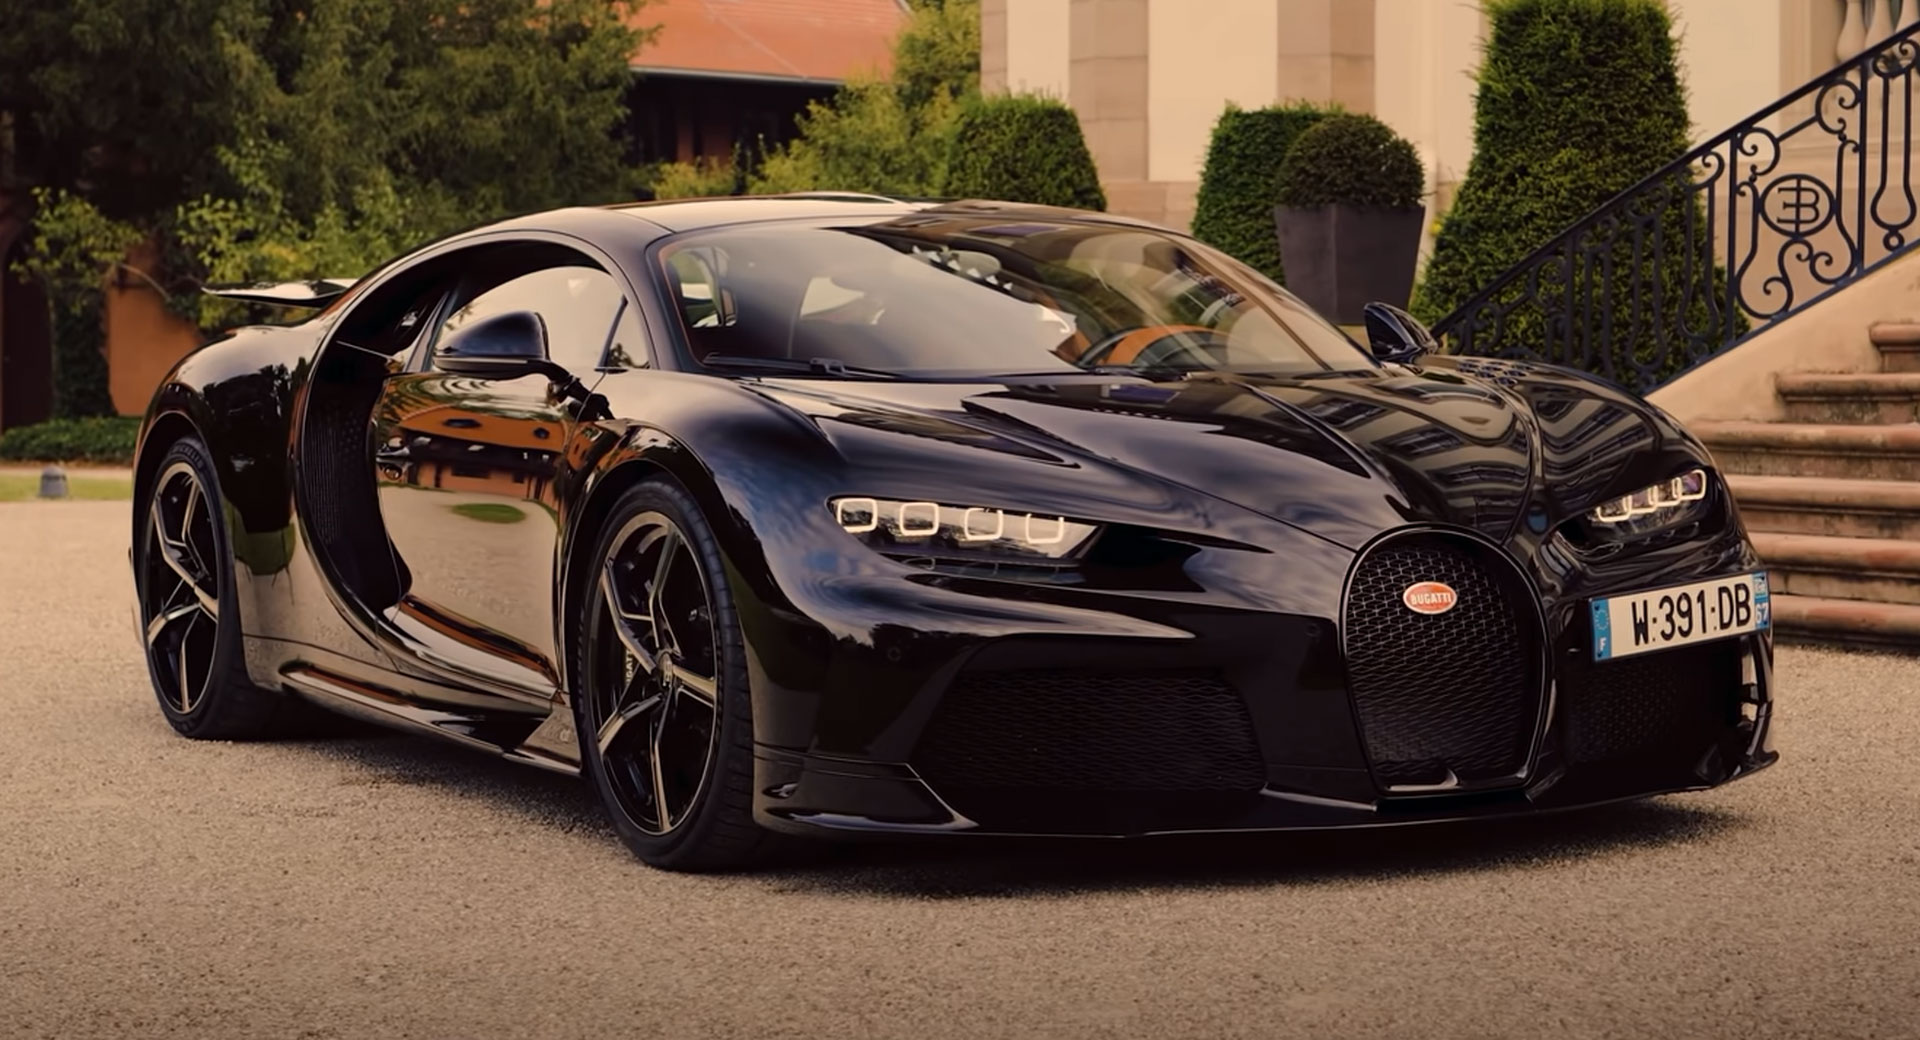 Top Gear Shows Us What It's Drive The Bugatti Chiron Super On The Autobahn And The | Carscoops